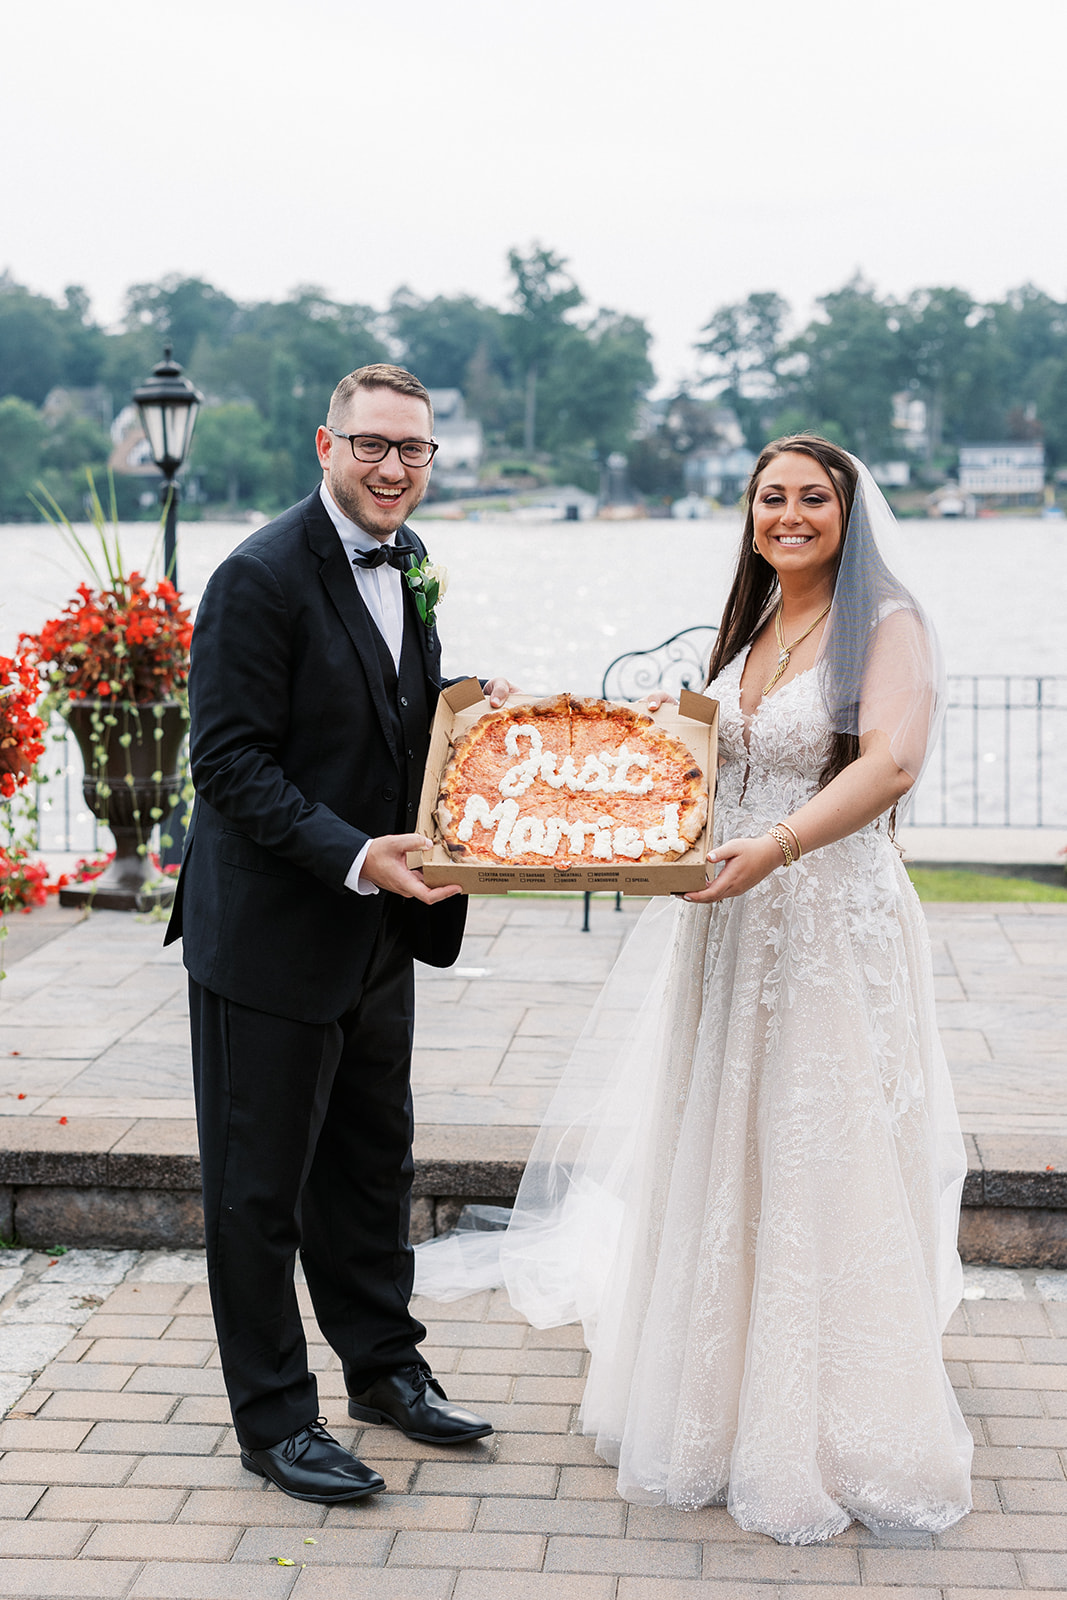 Newlyweds show off a pizza that says "just married"